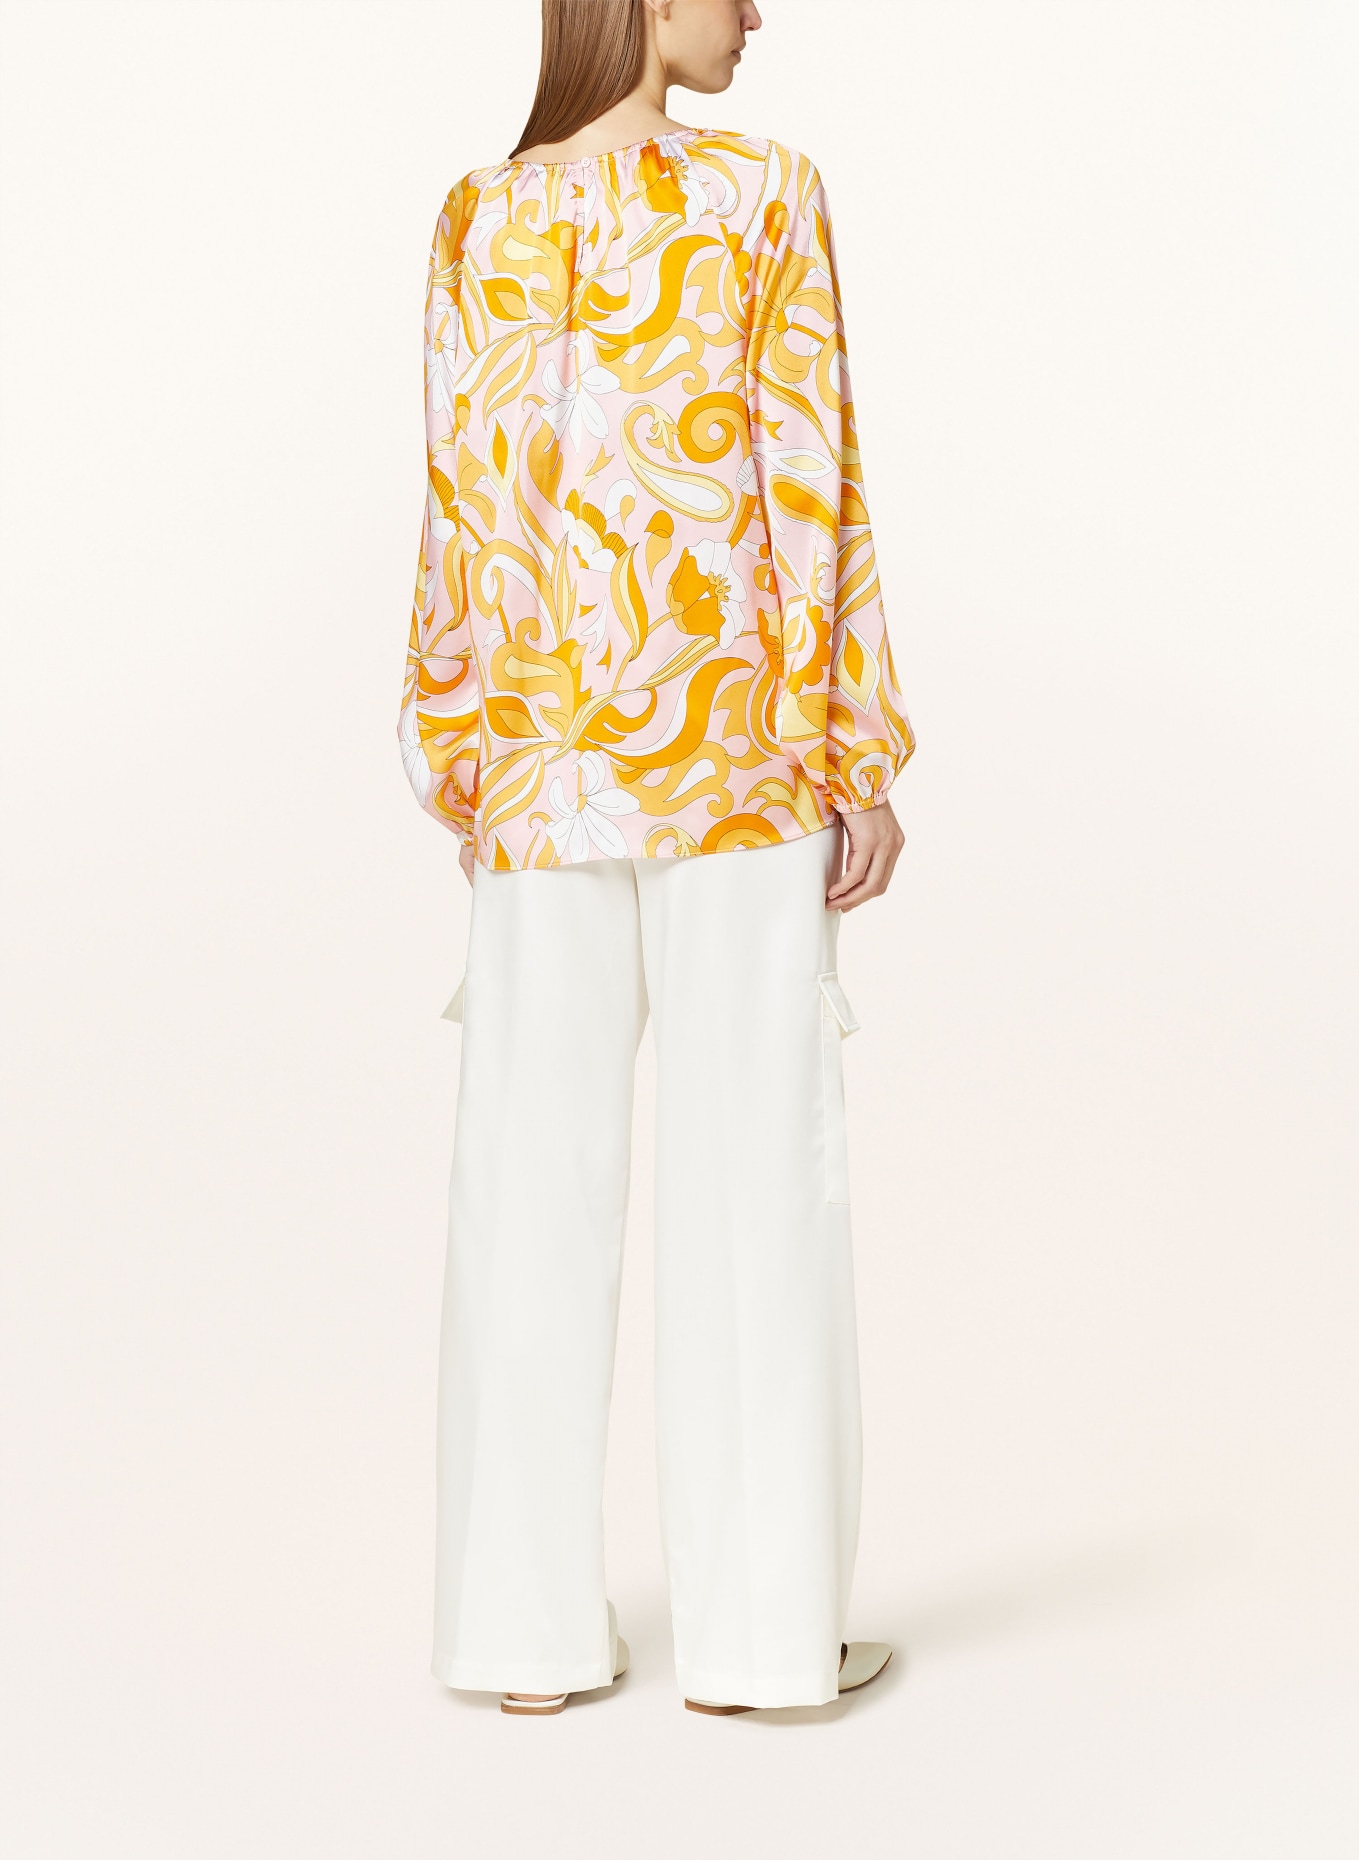 HERZEN'S ANGELEGENHEIT Shirt blouse in silk with cut-outs, Color: ROSE/ ORANGE/ YELLOW (Image 3)